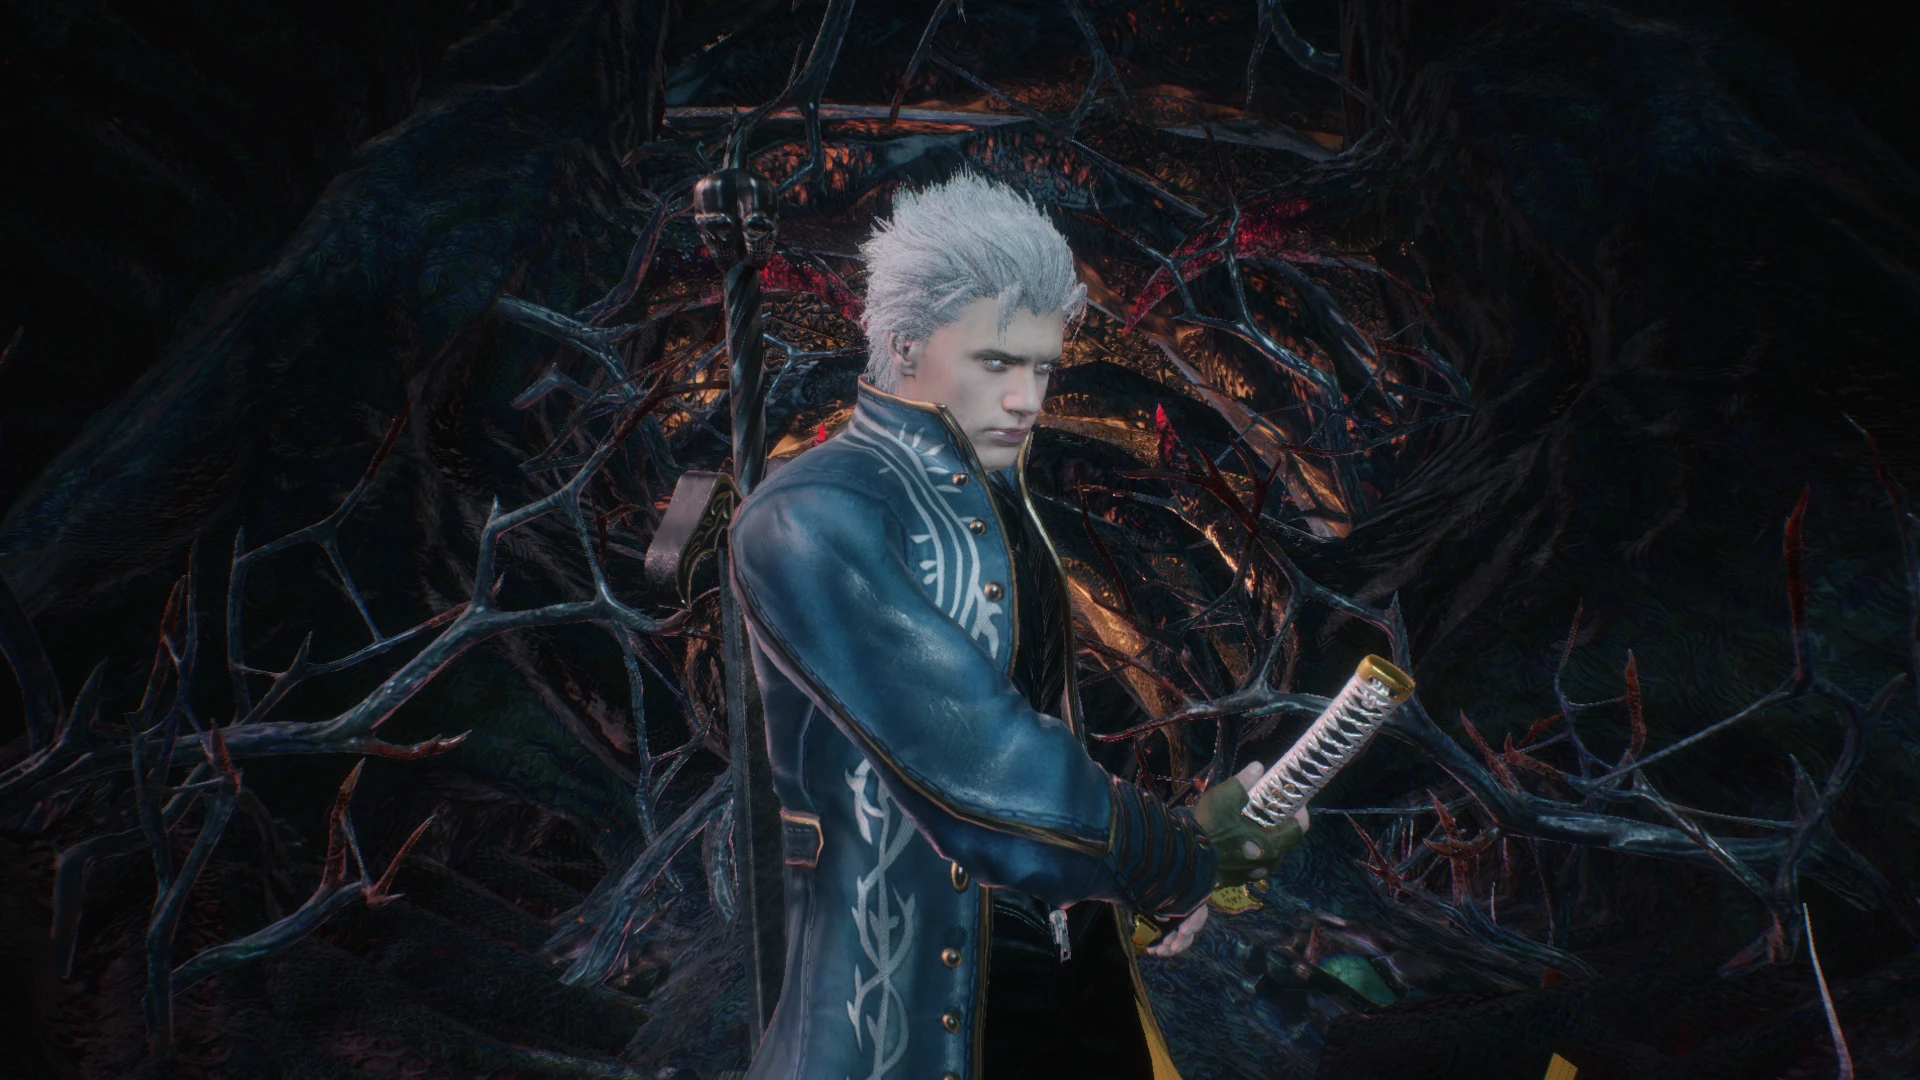 DMC3 Vergil (Texture Mod) at Devil May Cry 5 Nexus - Mods and